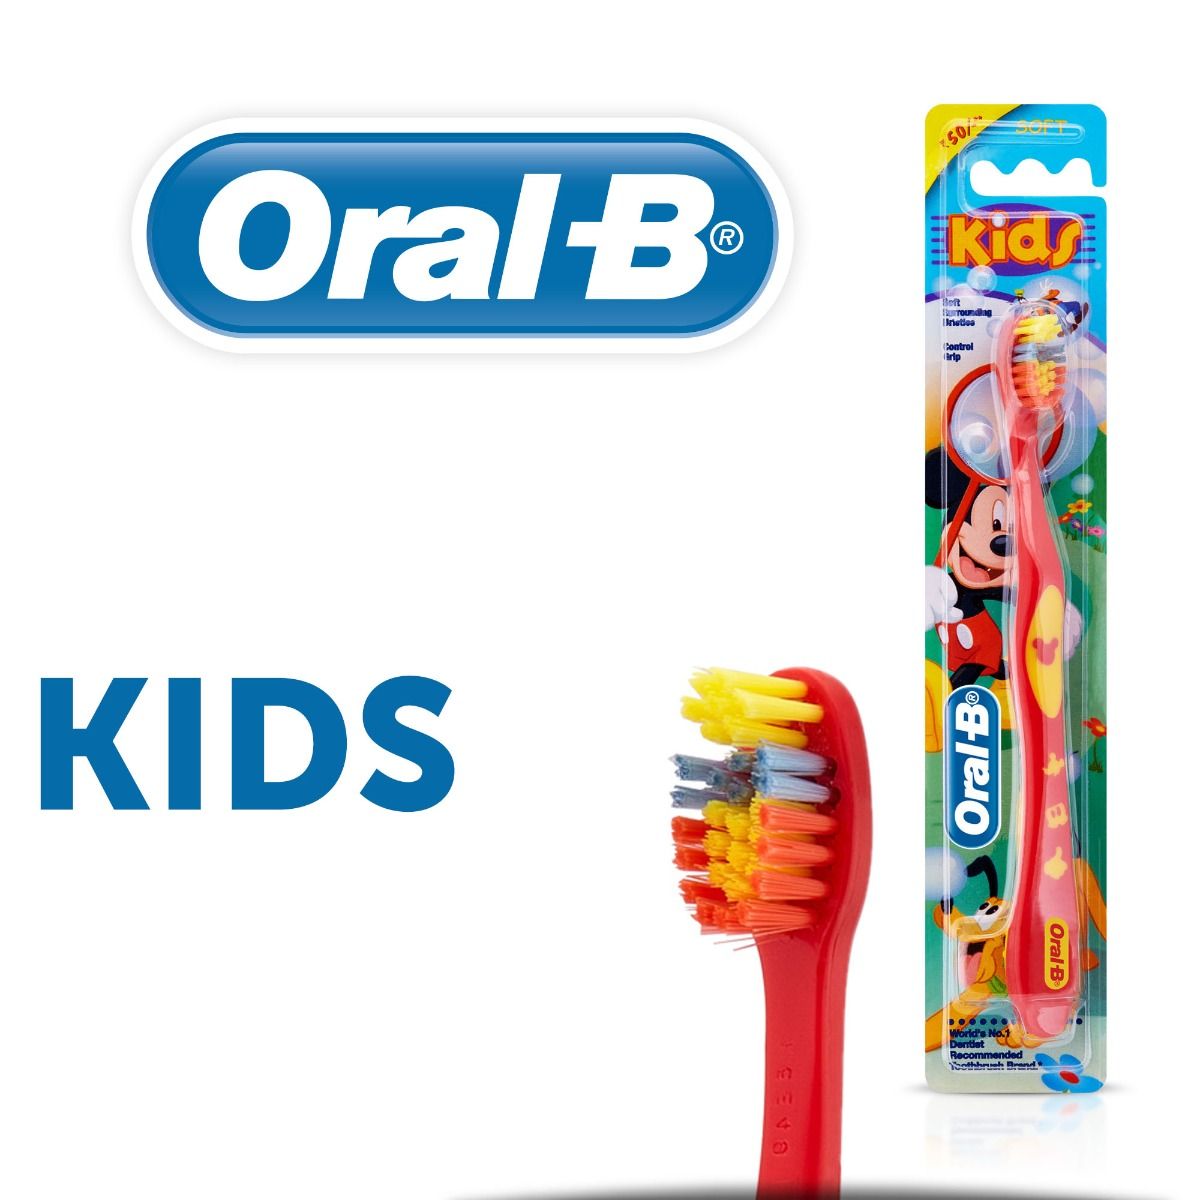 Buy Oral-B Kids Soft Toothbrush, 1 Count Online